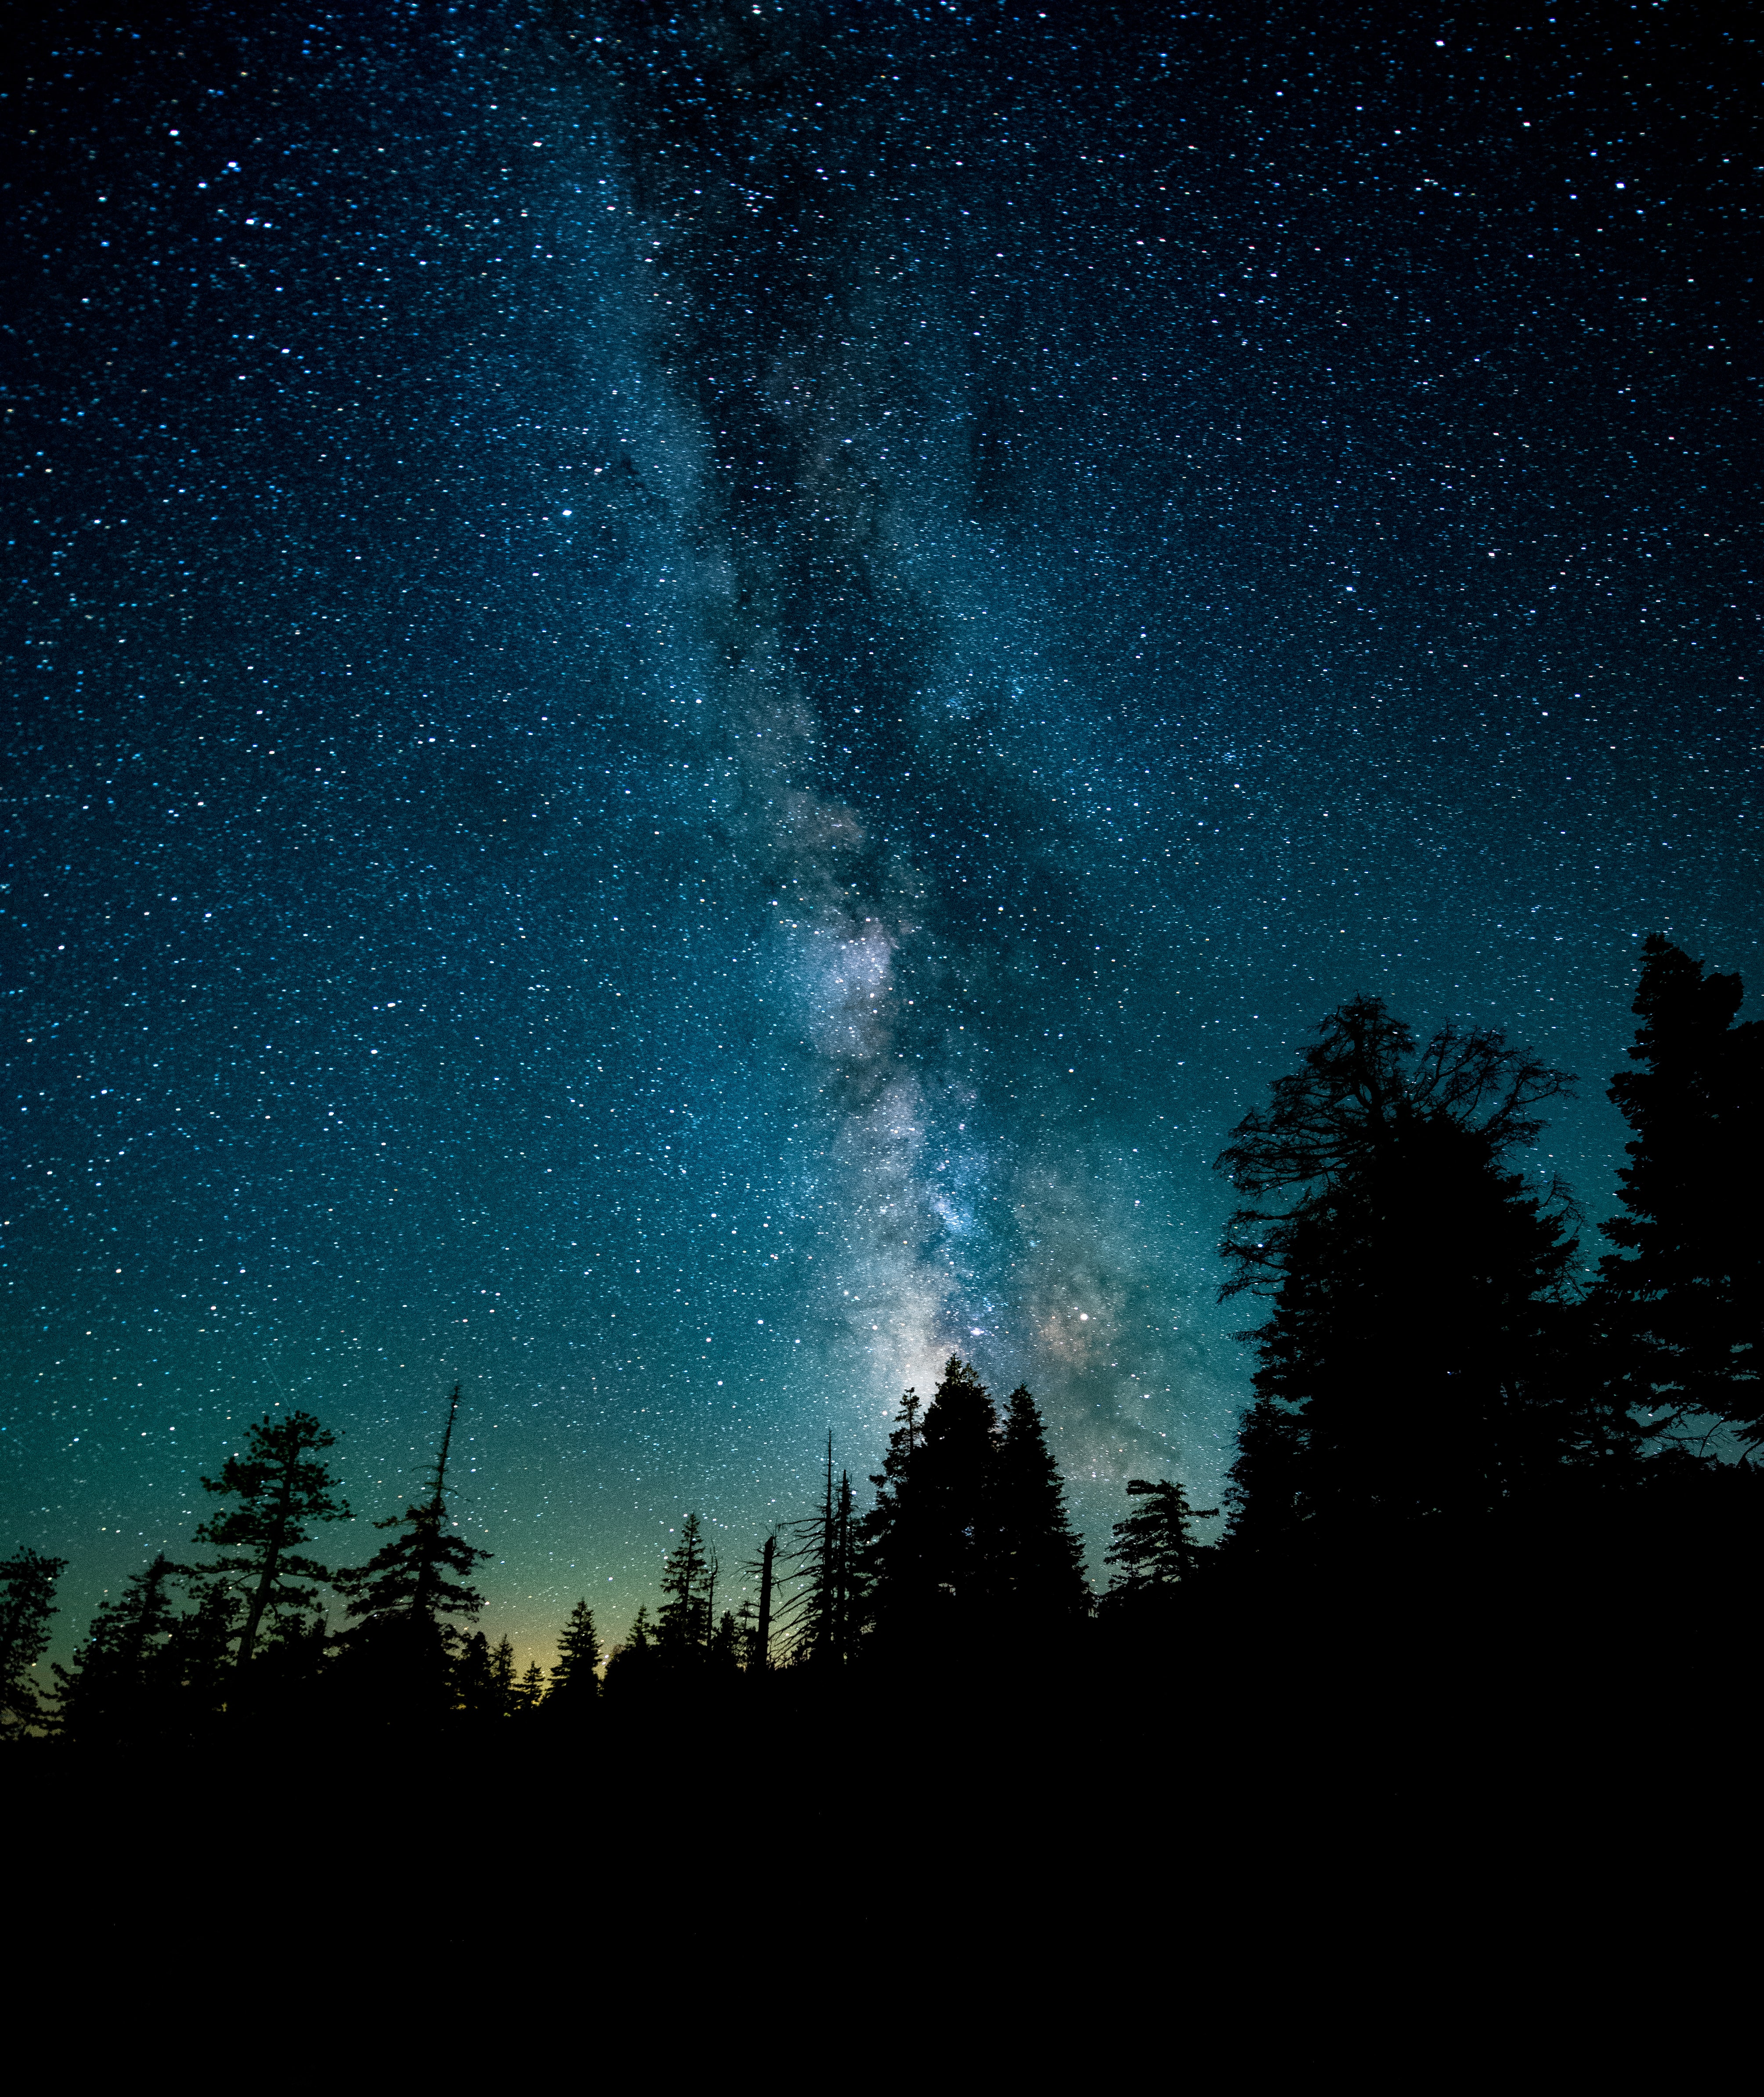 The Milky Way stands out clearly in the night sky over a forest.